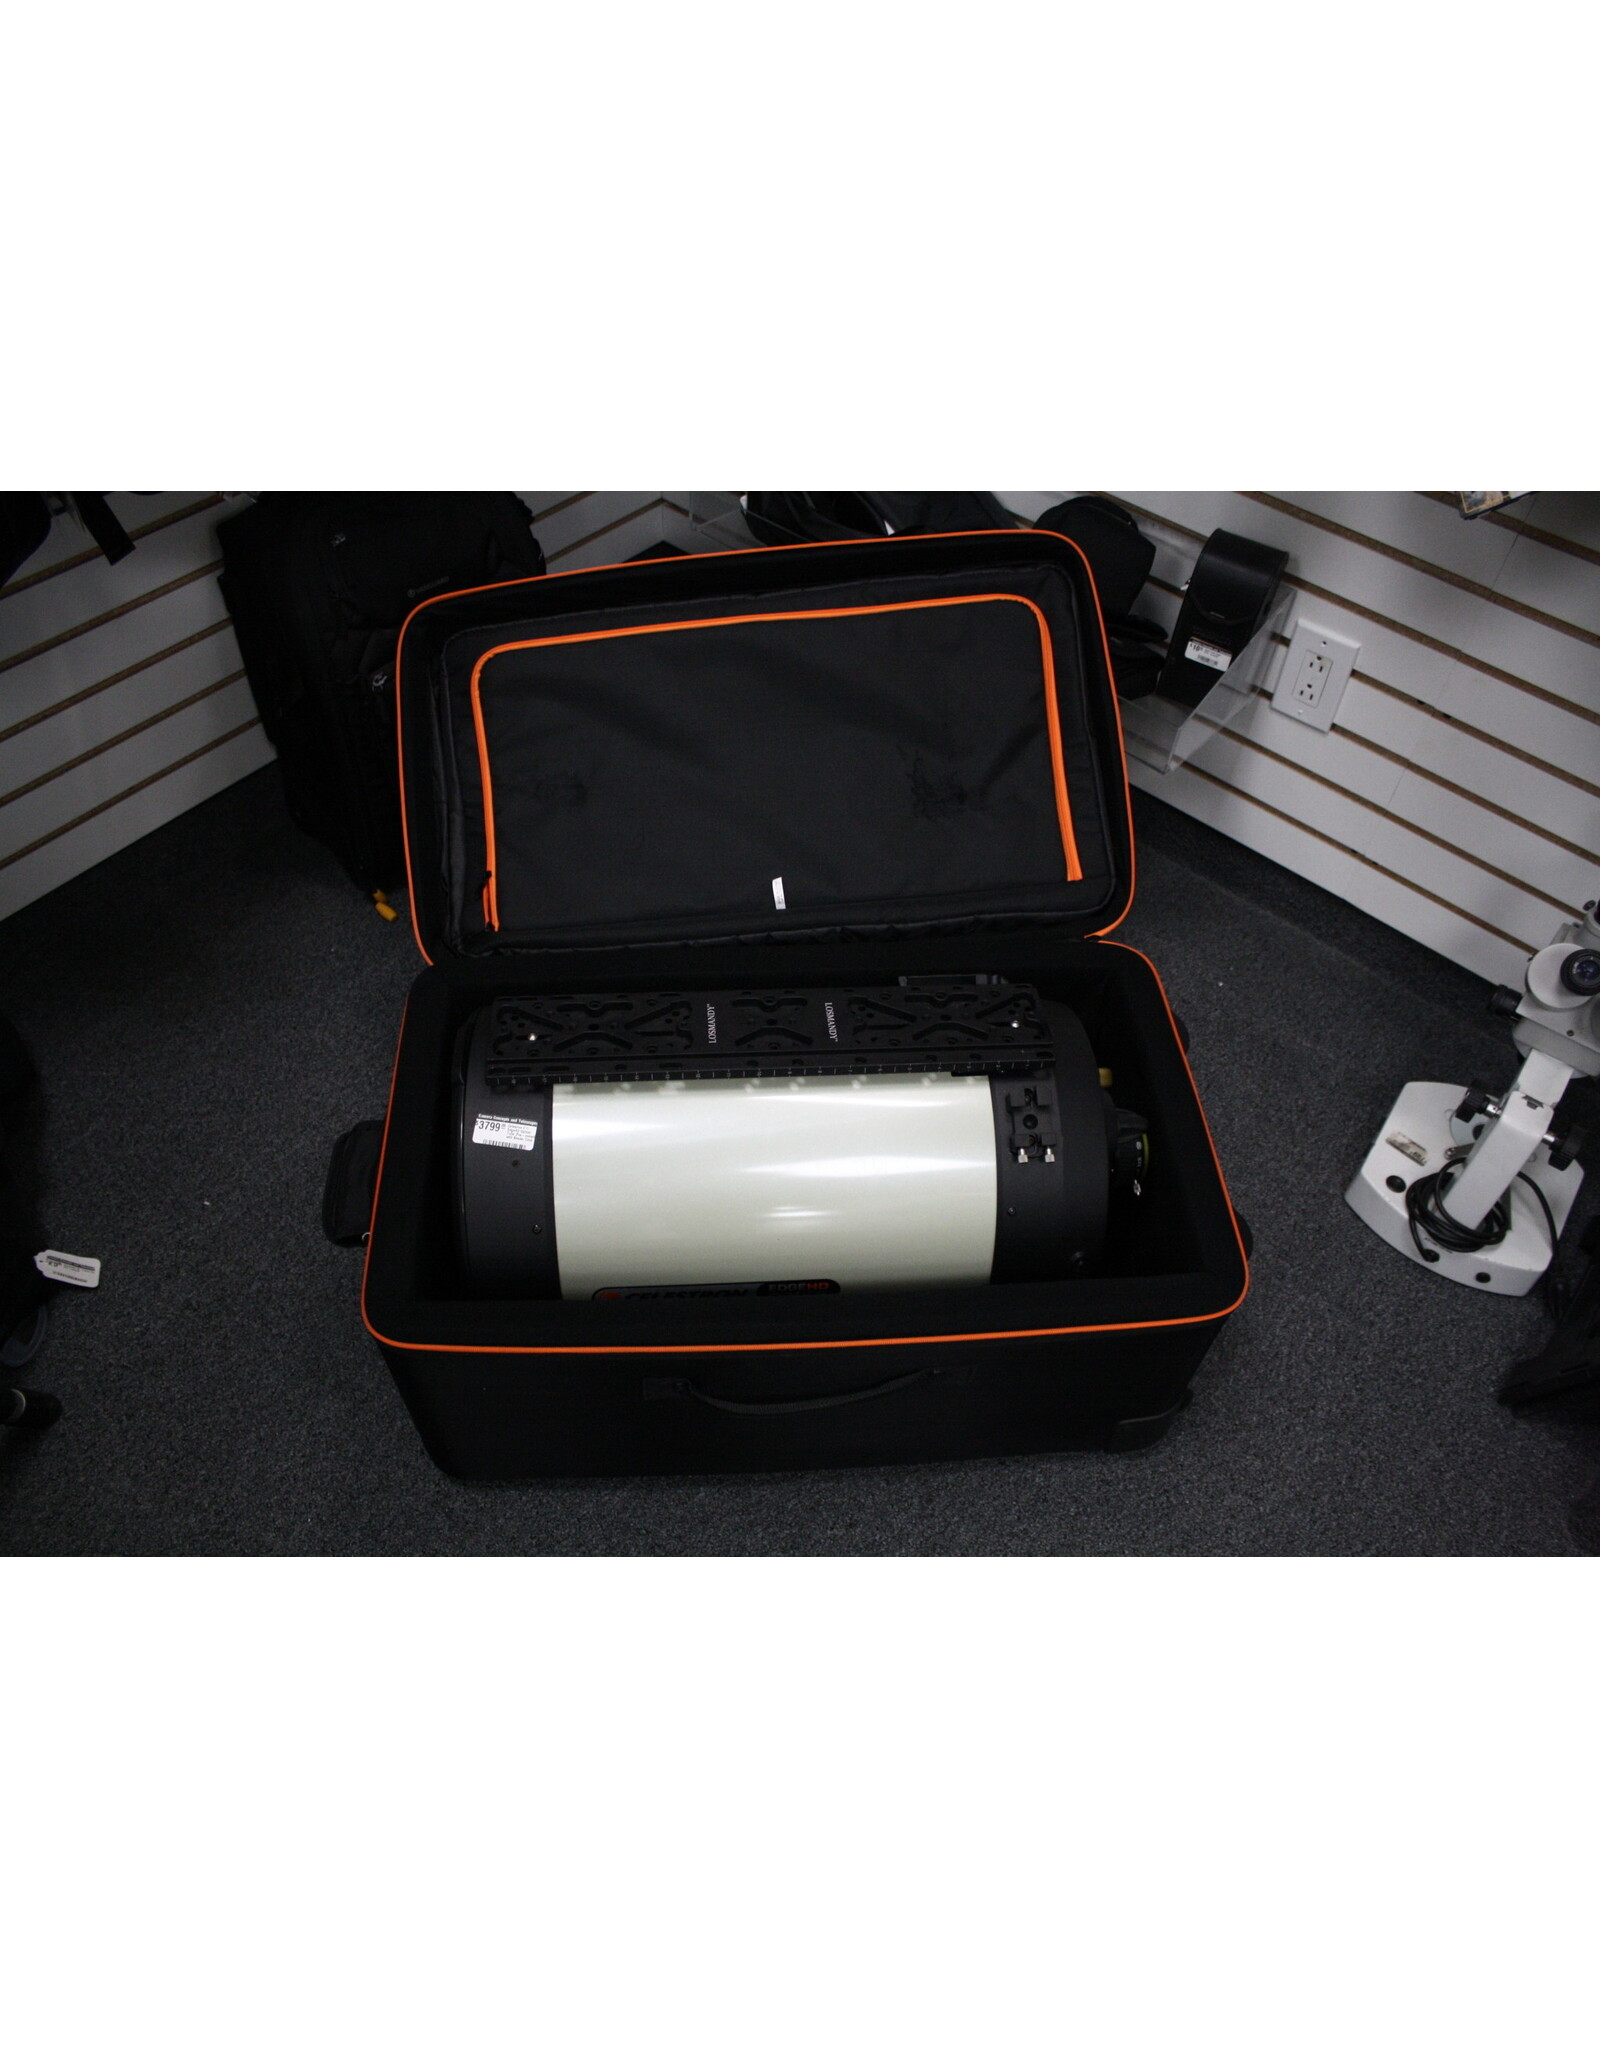 Celestron Celestron C11 EdgeHD Optical Tube (Pre-owned) with Baader Click lock Visual Back, Feathertouch Microfocuser, Losmandy Dovetail Bar,  & Celestron Rolling Case